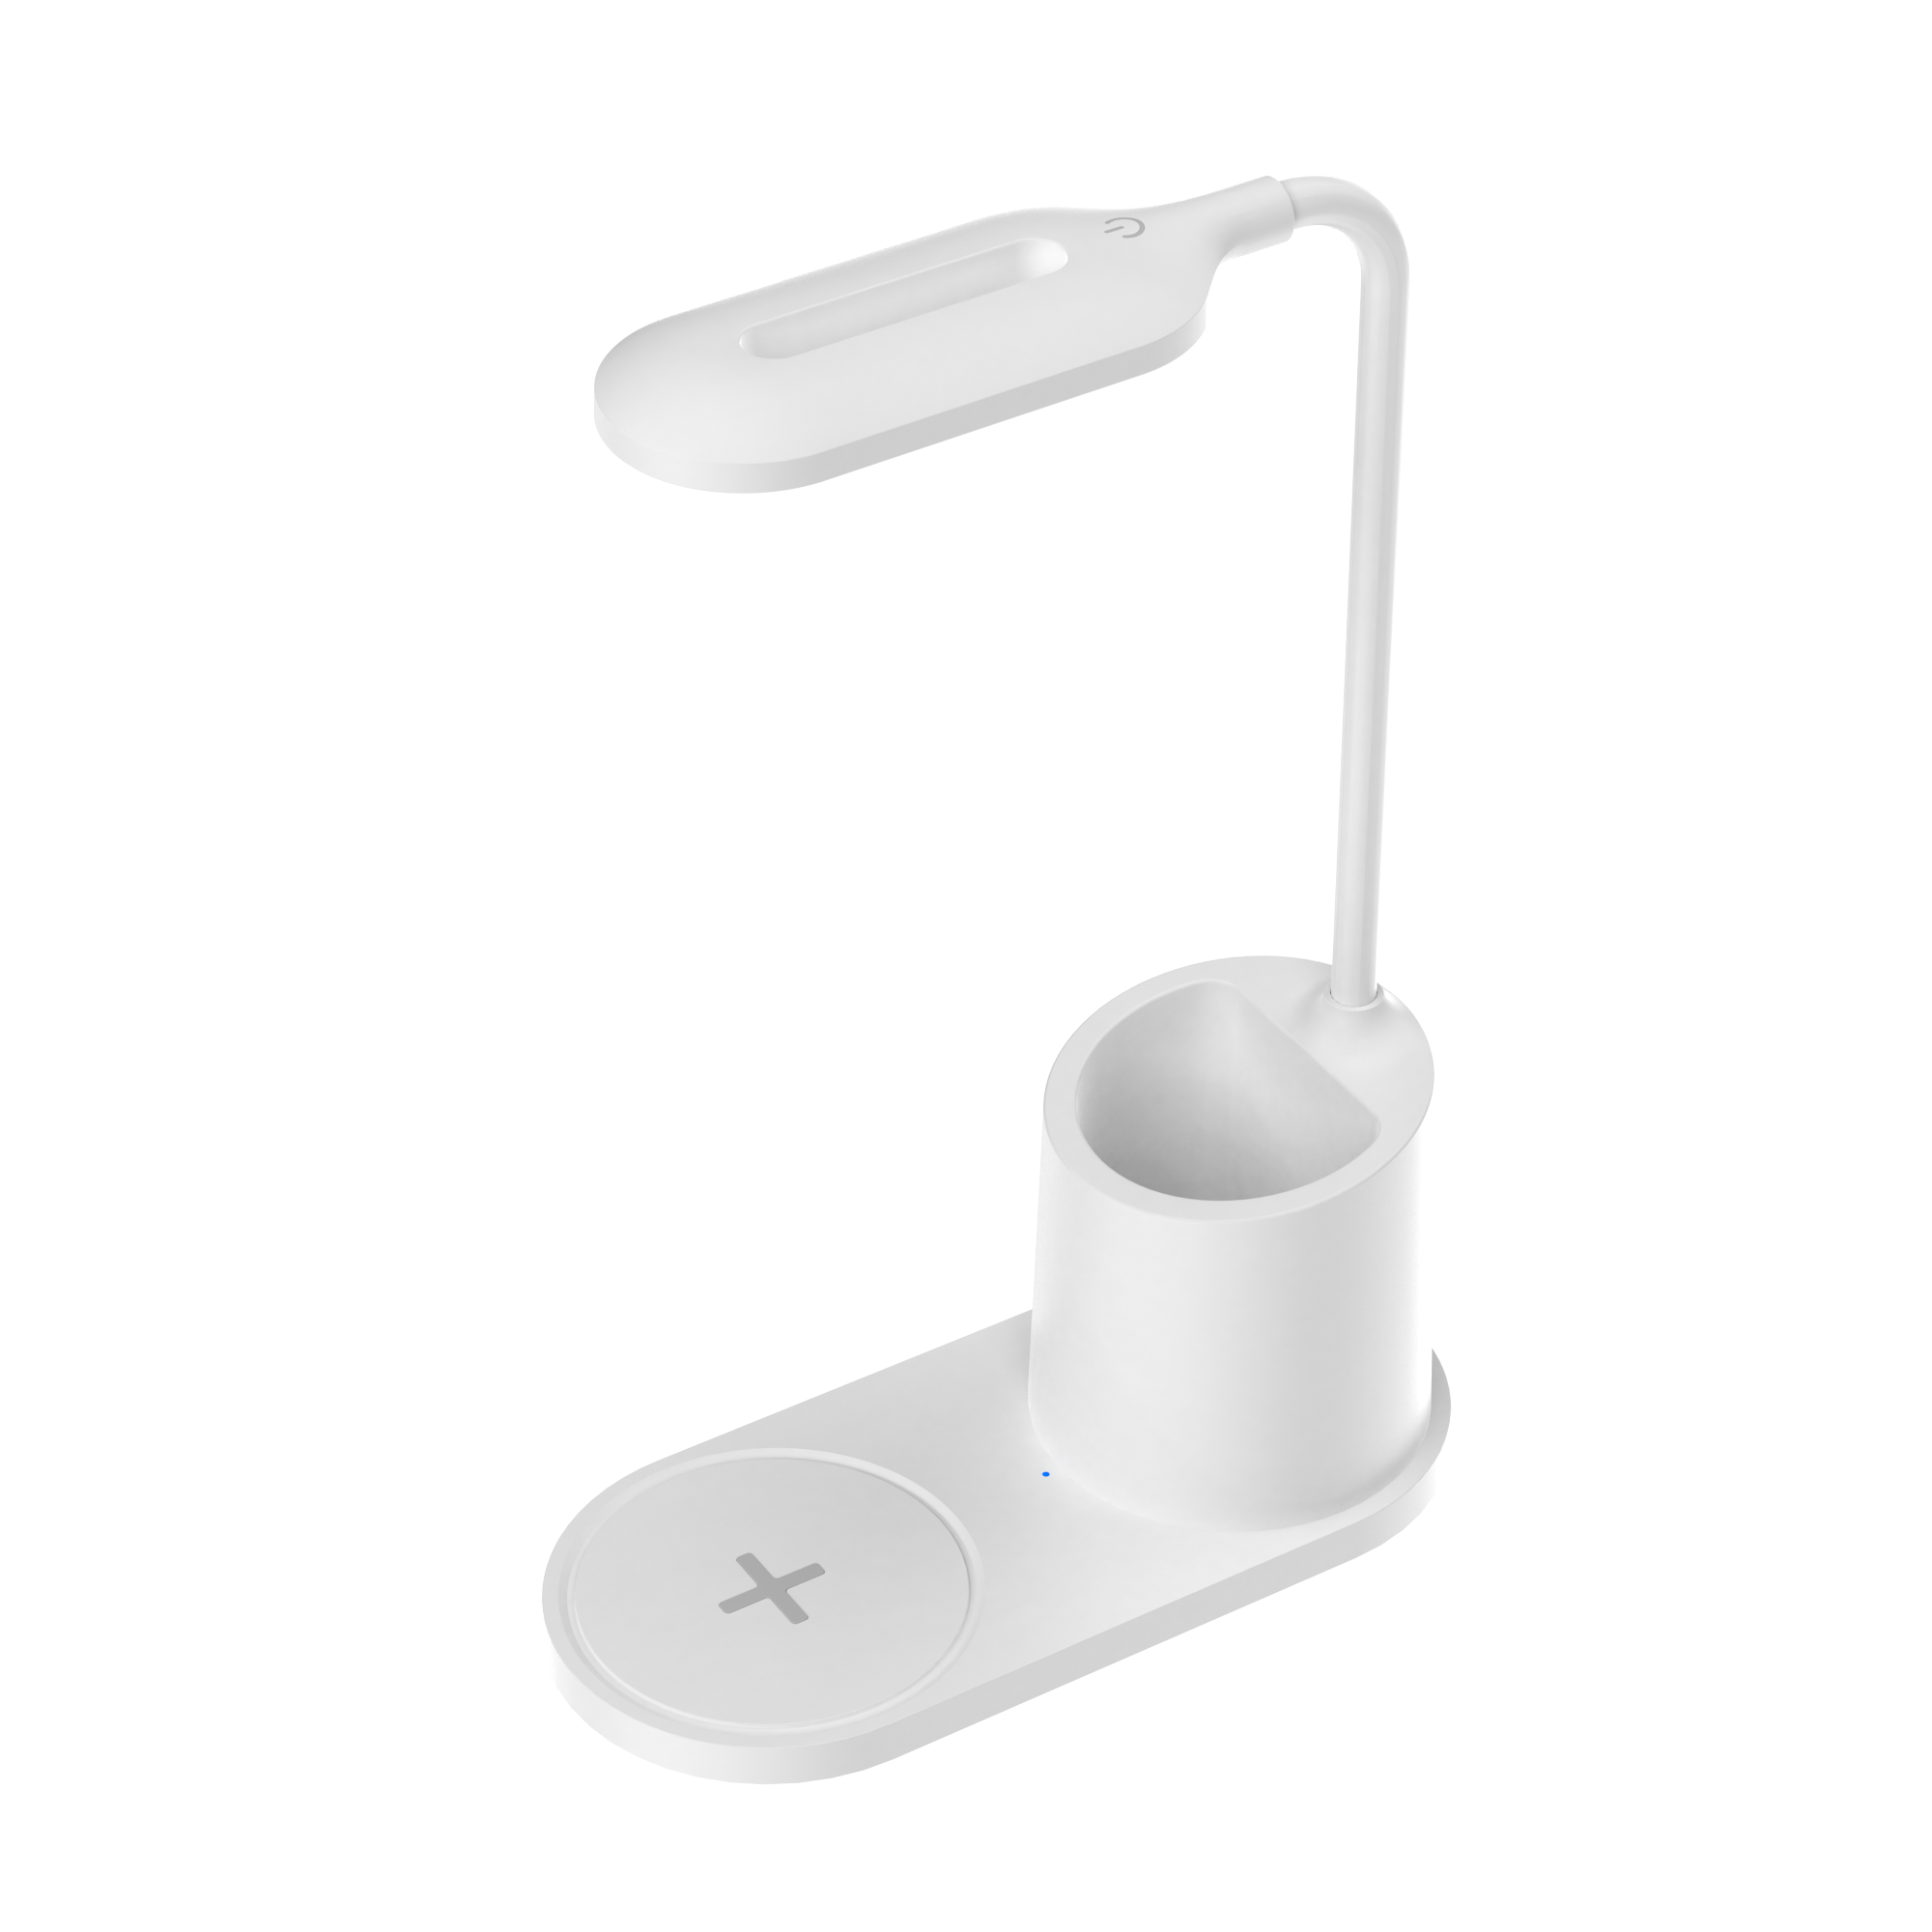 HHT513 Hot selling On Amazon Led Table Lamp With Holder Wireless Charger Night Light 3 in 1 Office Lamp Touch Switch For study